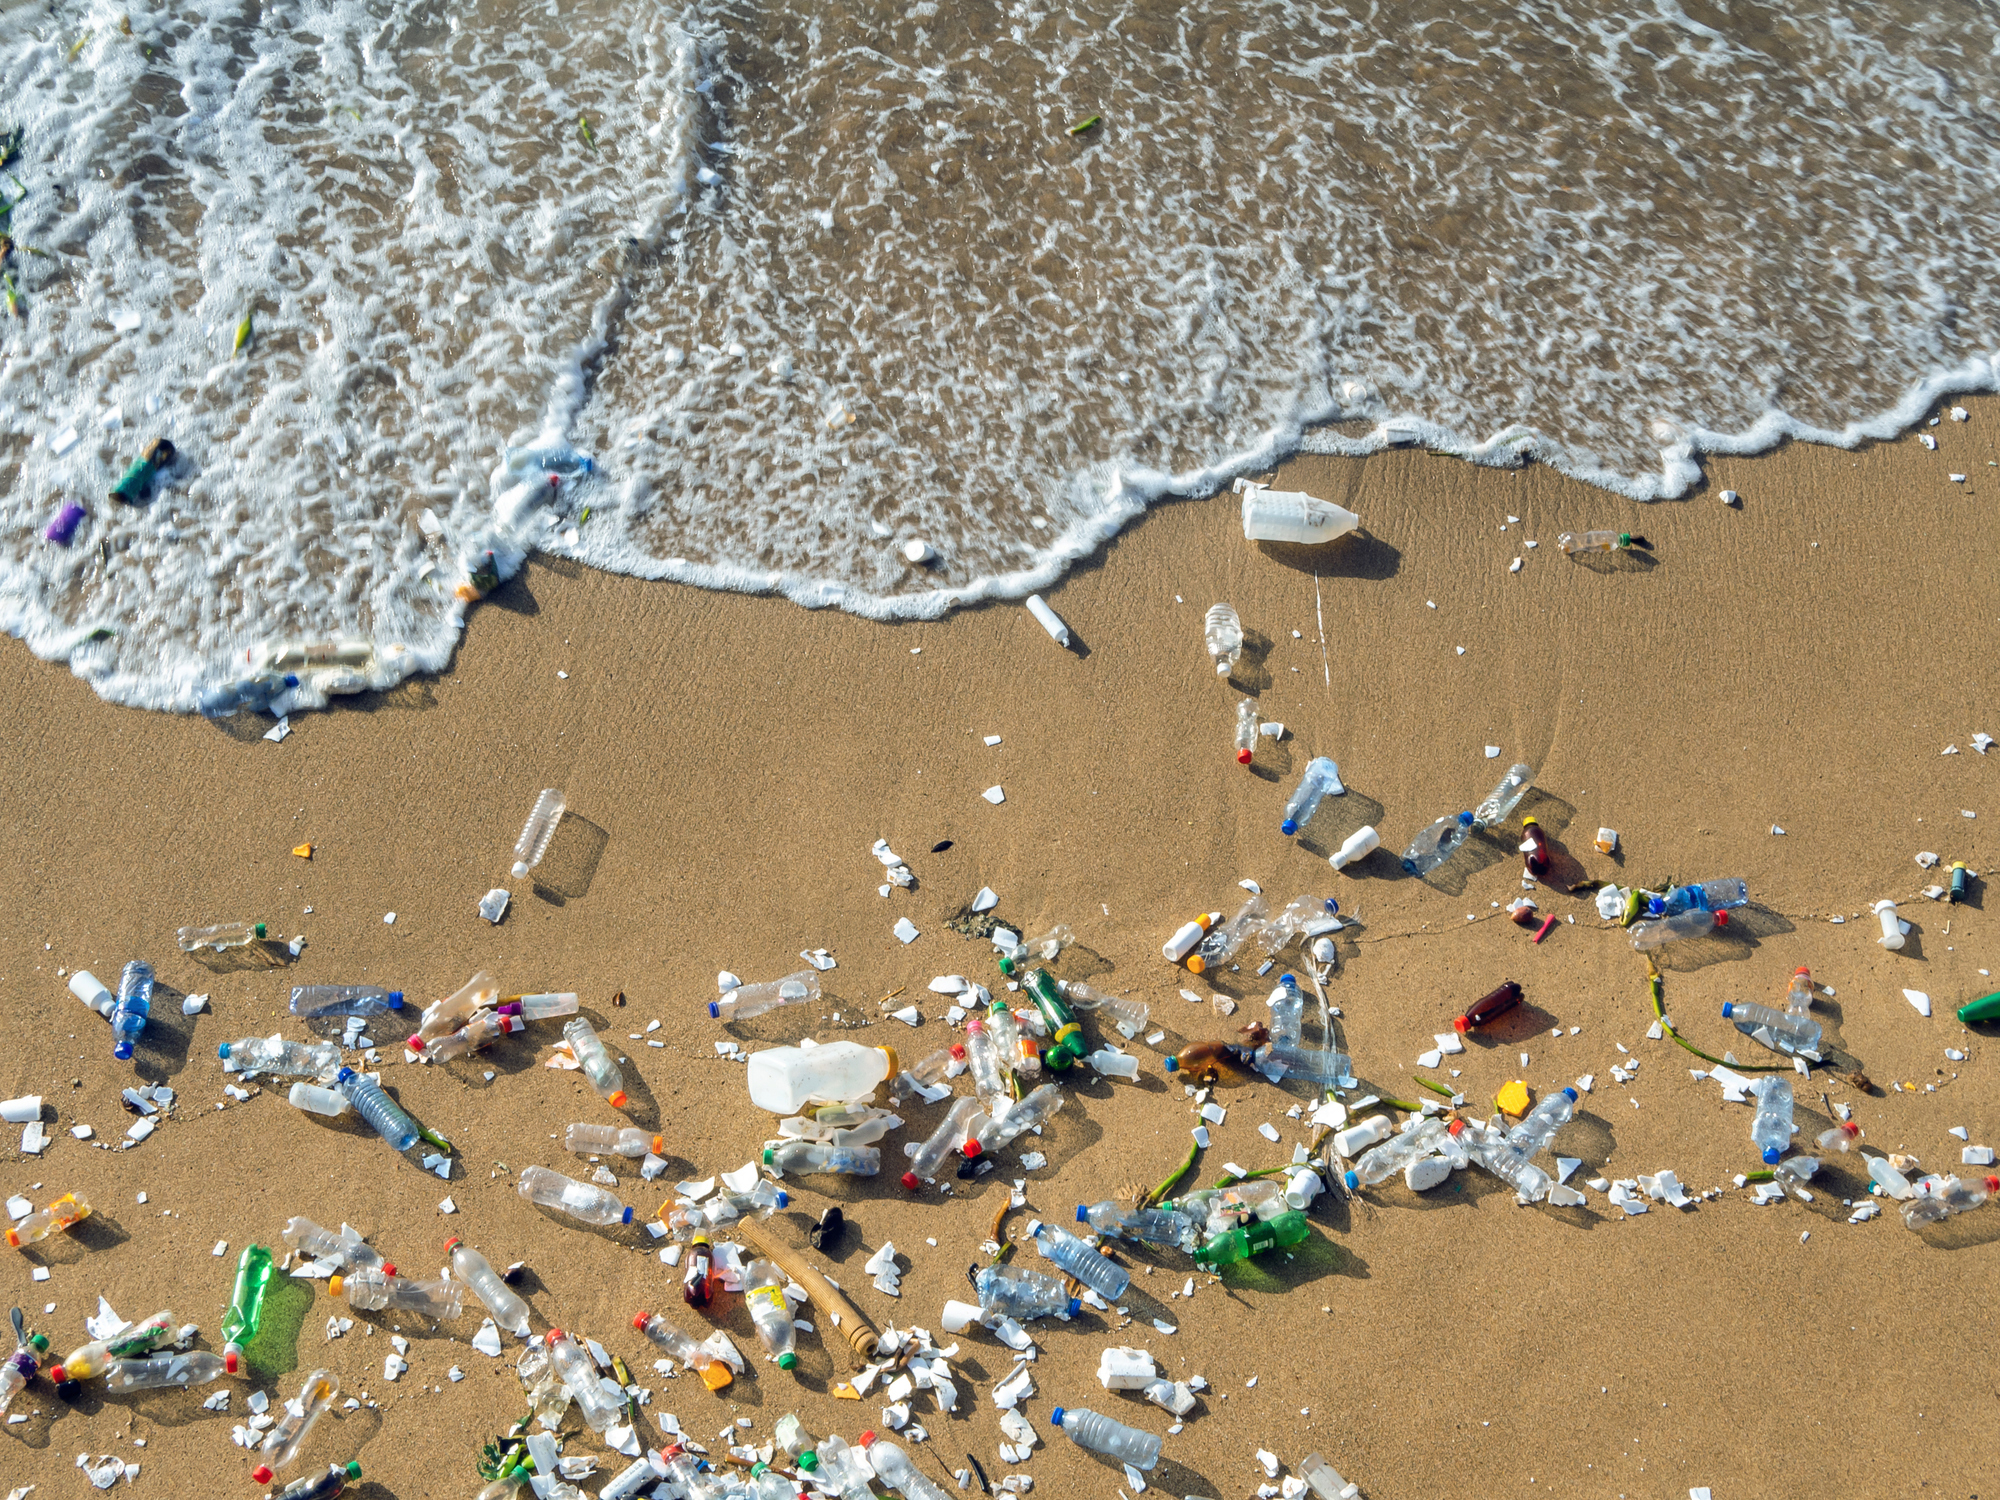 Plastic bottles, containers, and other debris scattered along a sandy beach with waves washing up. The image highlights environmental pollution